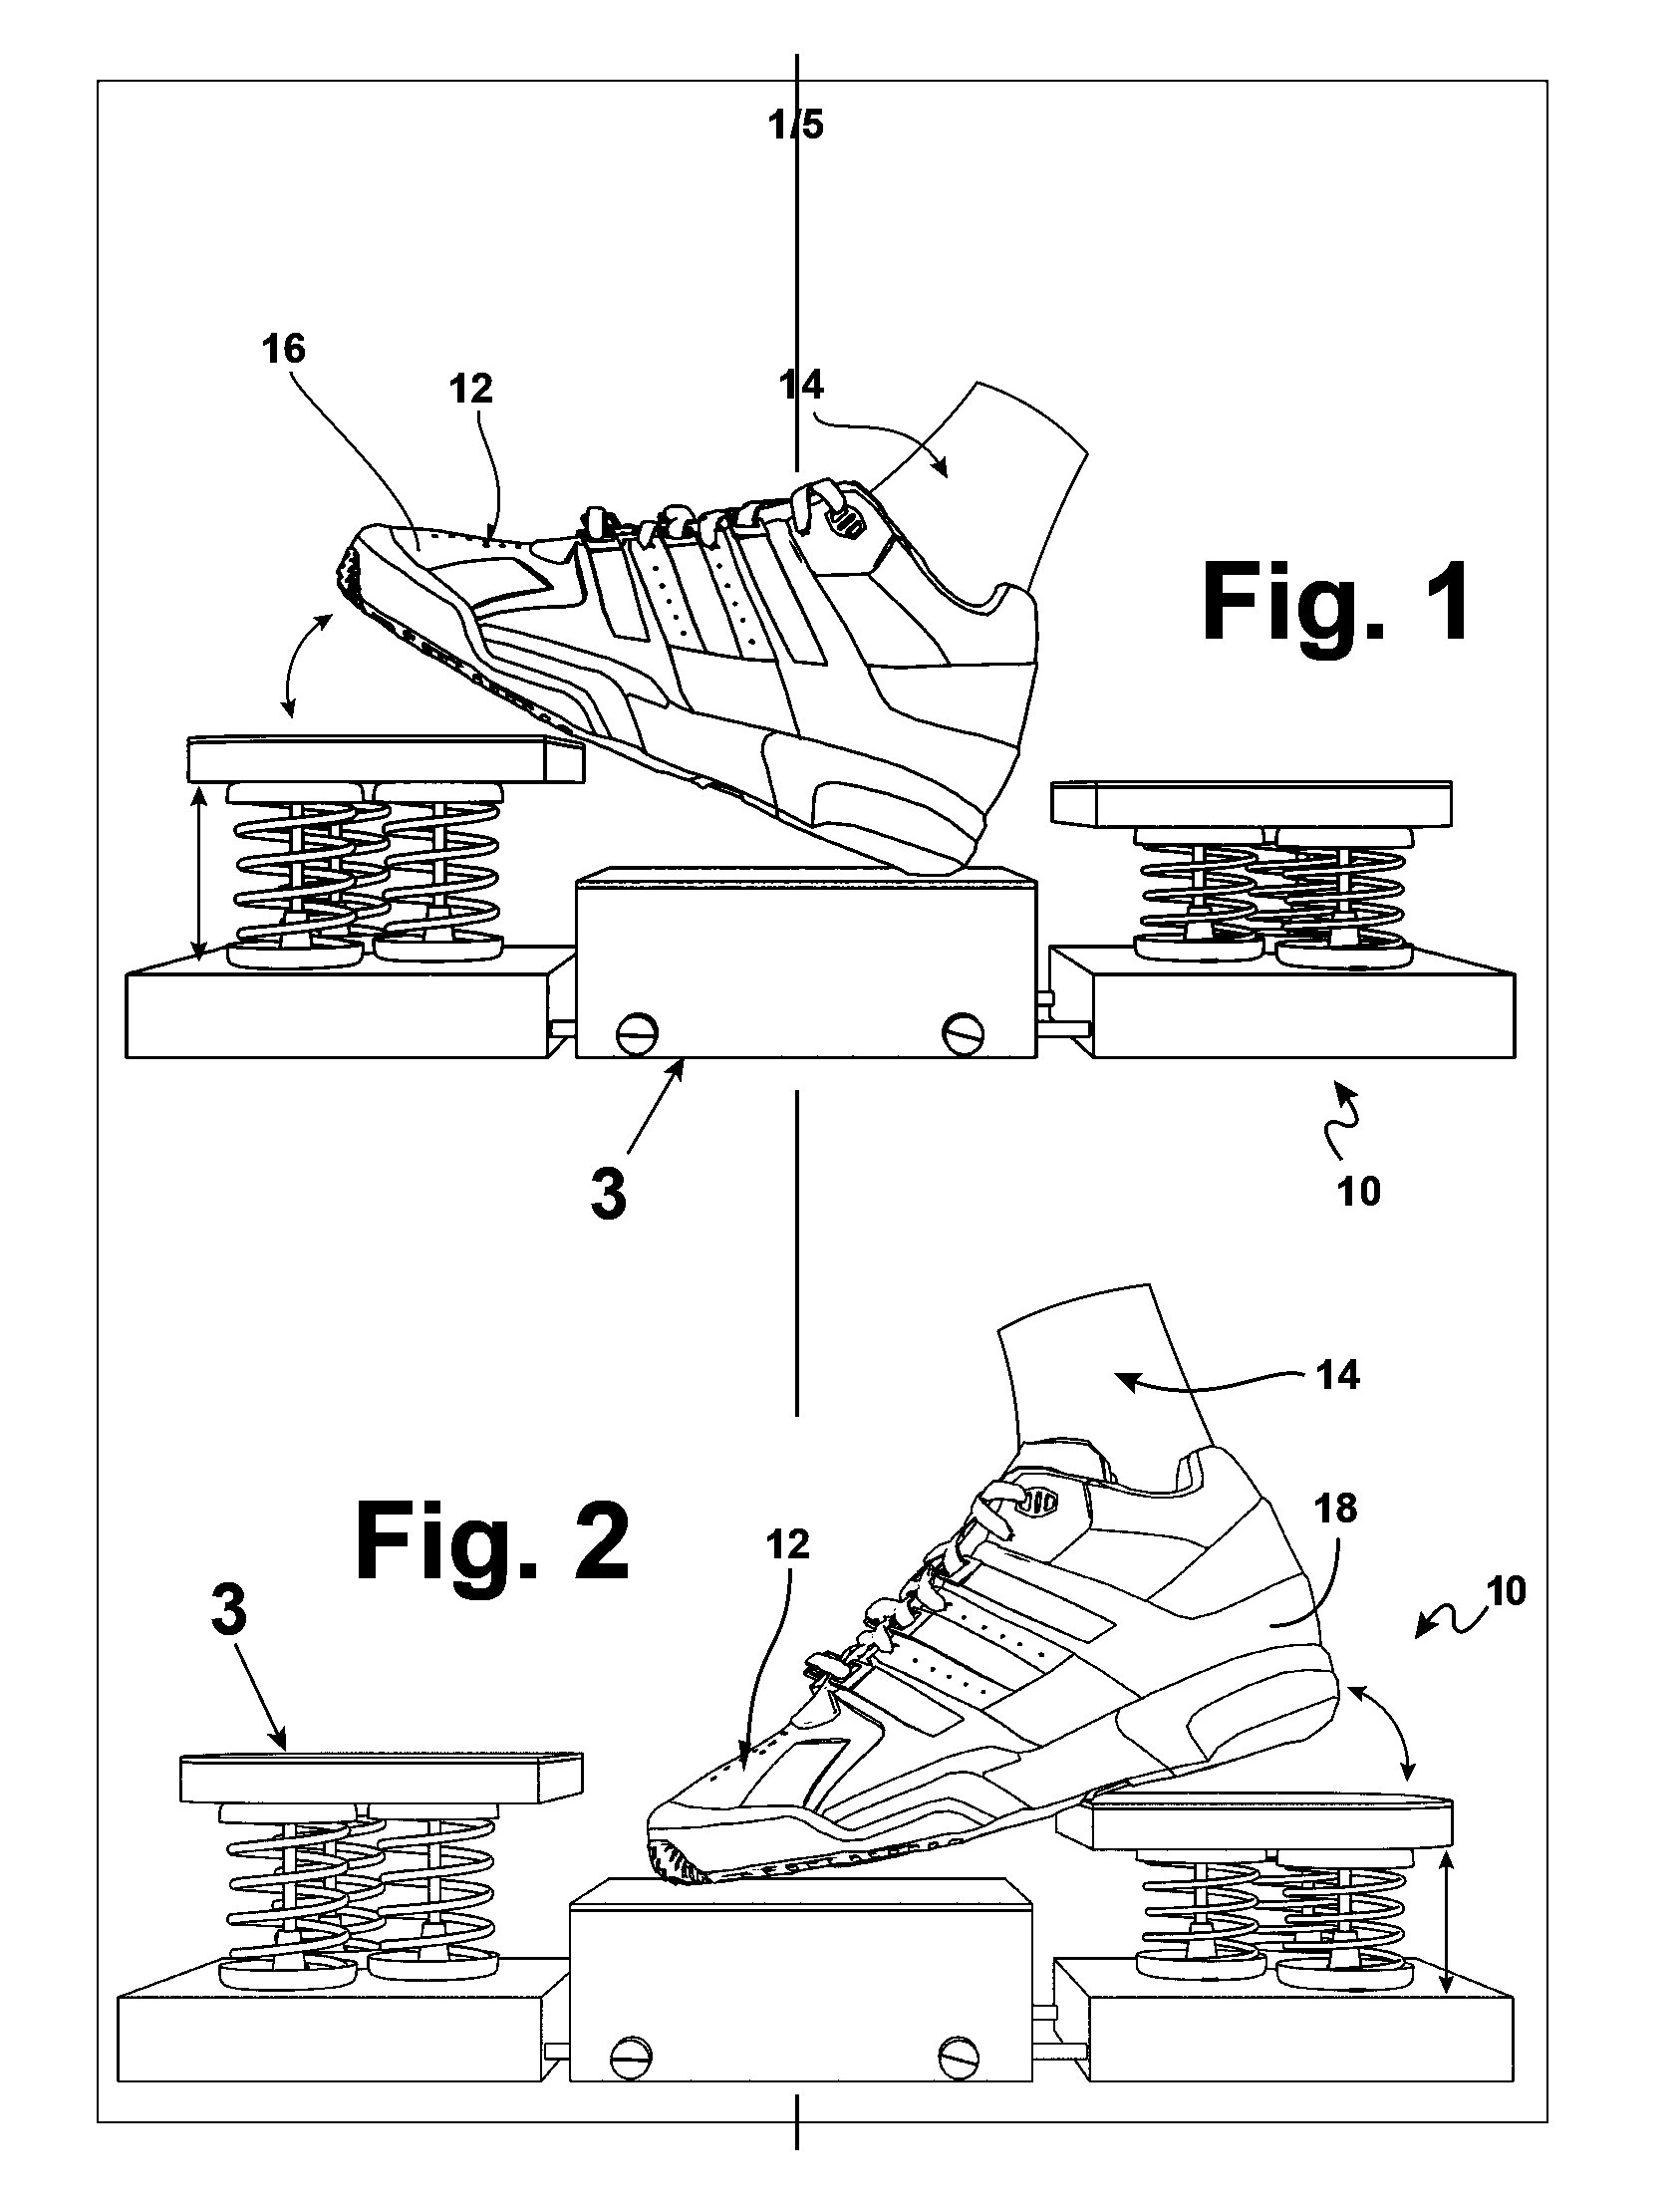 Foot exercise device